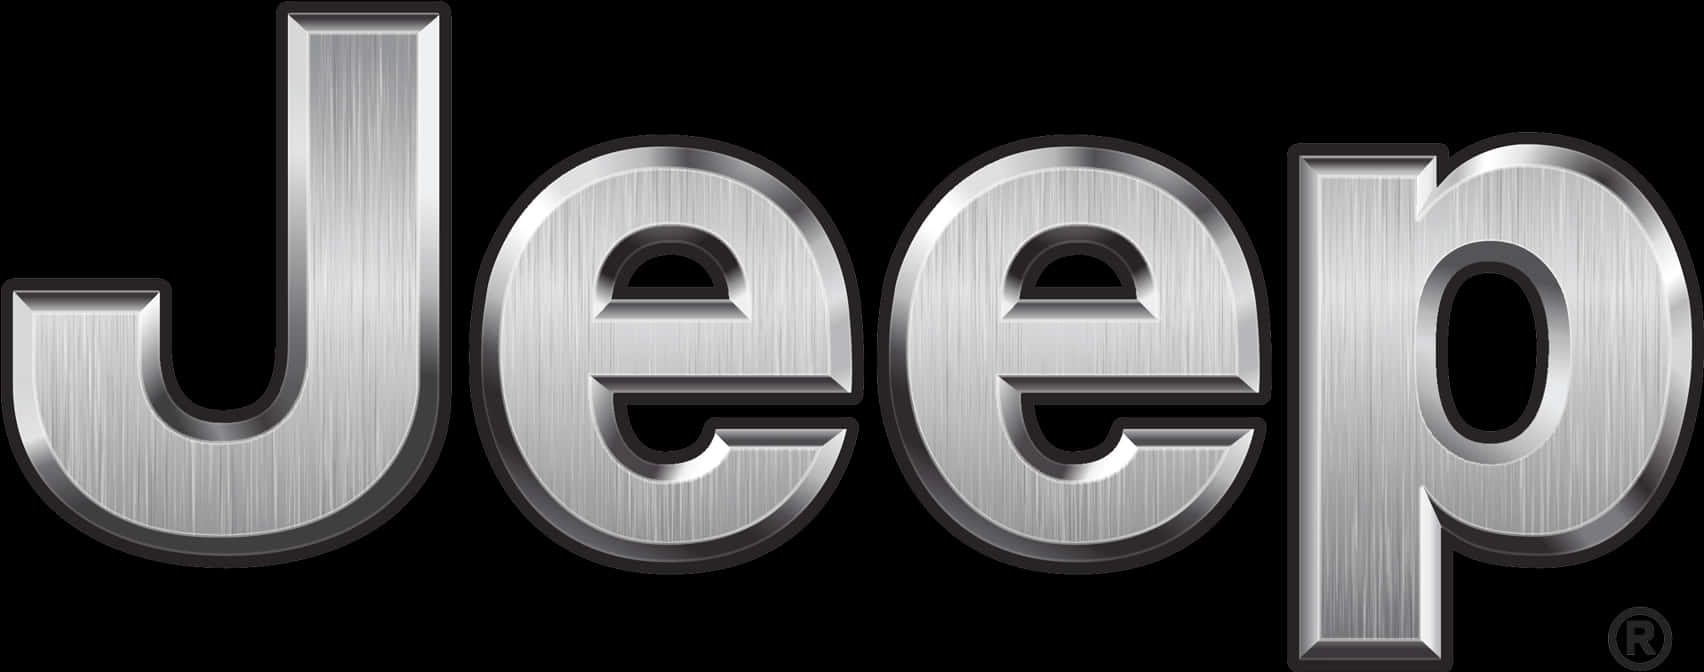 A Silver Letters On A Black Background